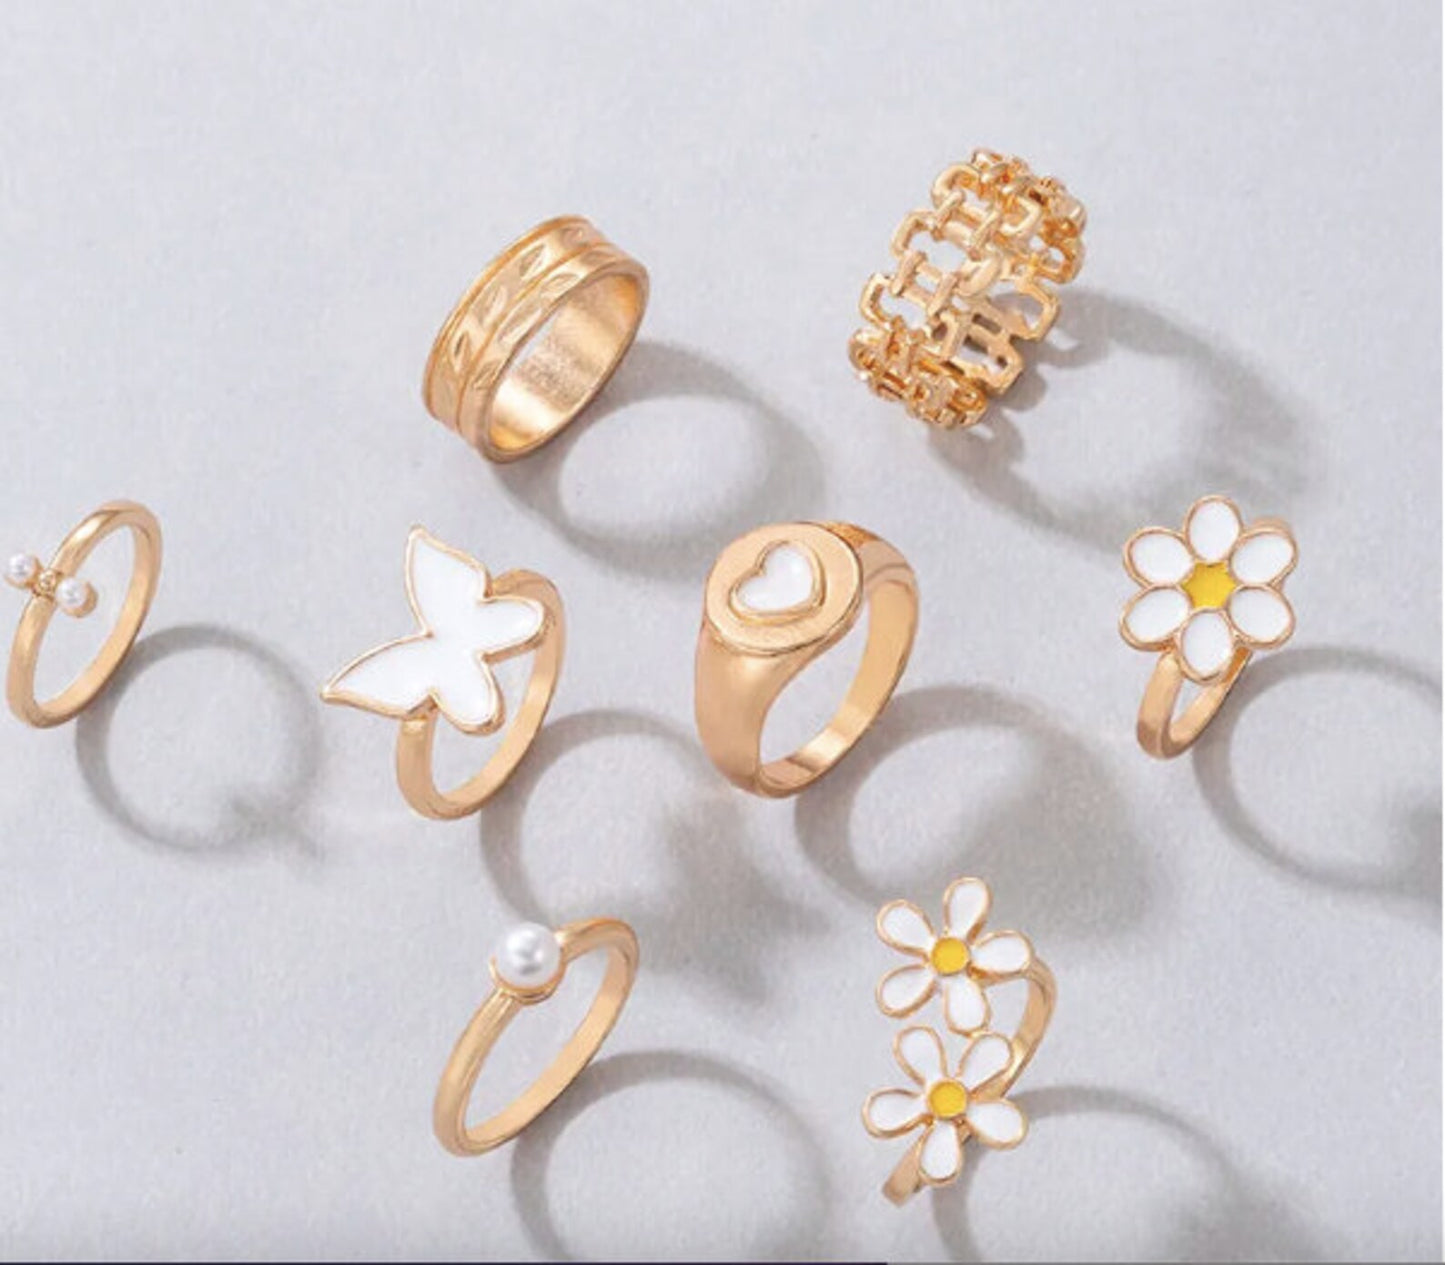 Floral Set of Gold and White Rings